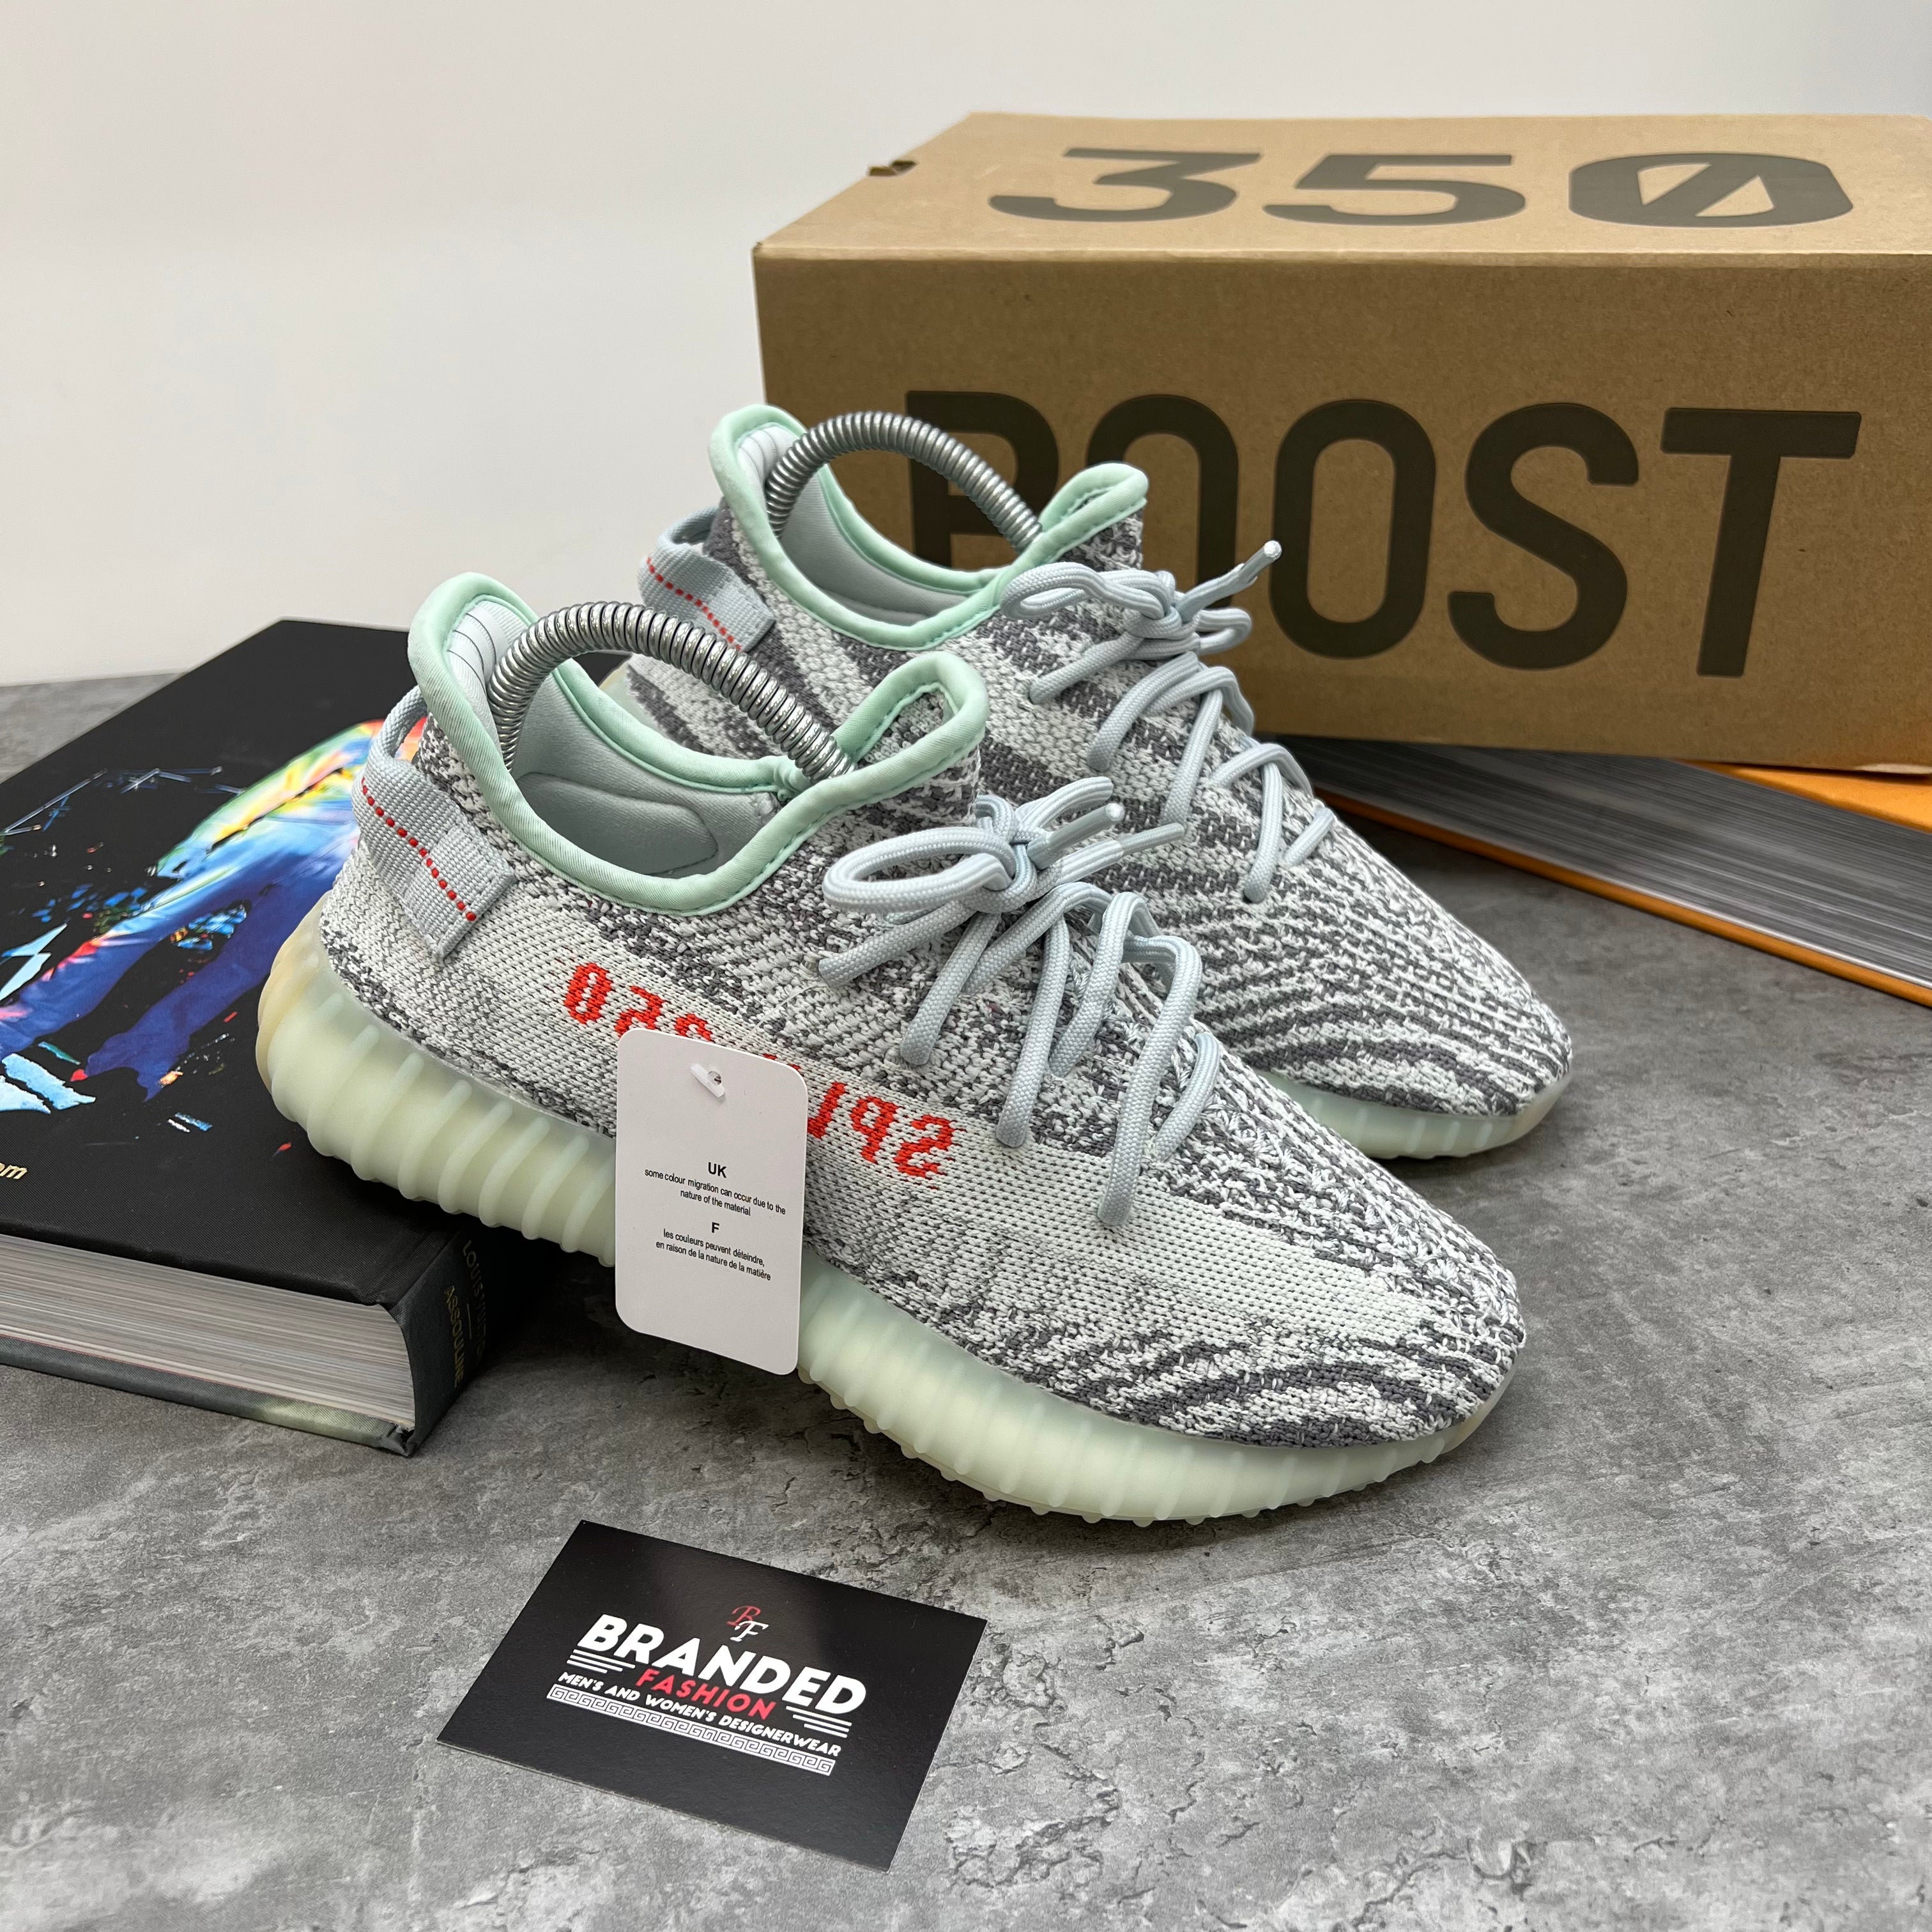 YEEZY 350 TRAINER - BLUE TINT (PRE-ORDER)